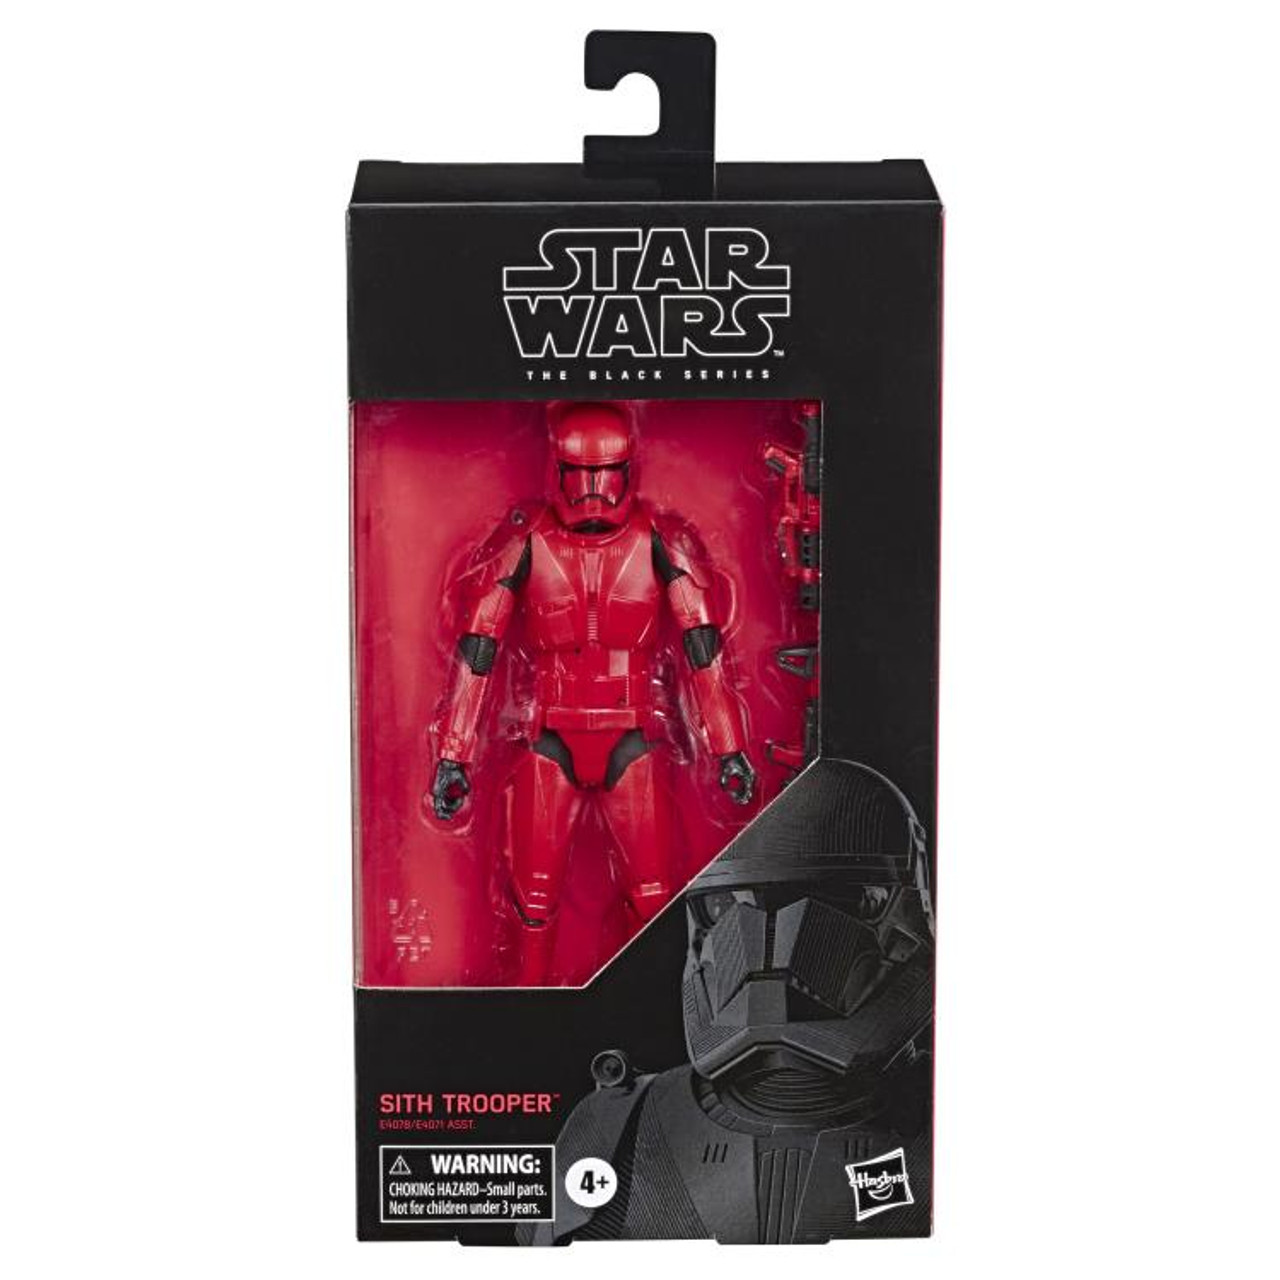 Star Wars ~ The Black Series ~ Sith Trooper 6-Inch Action Figure